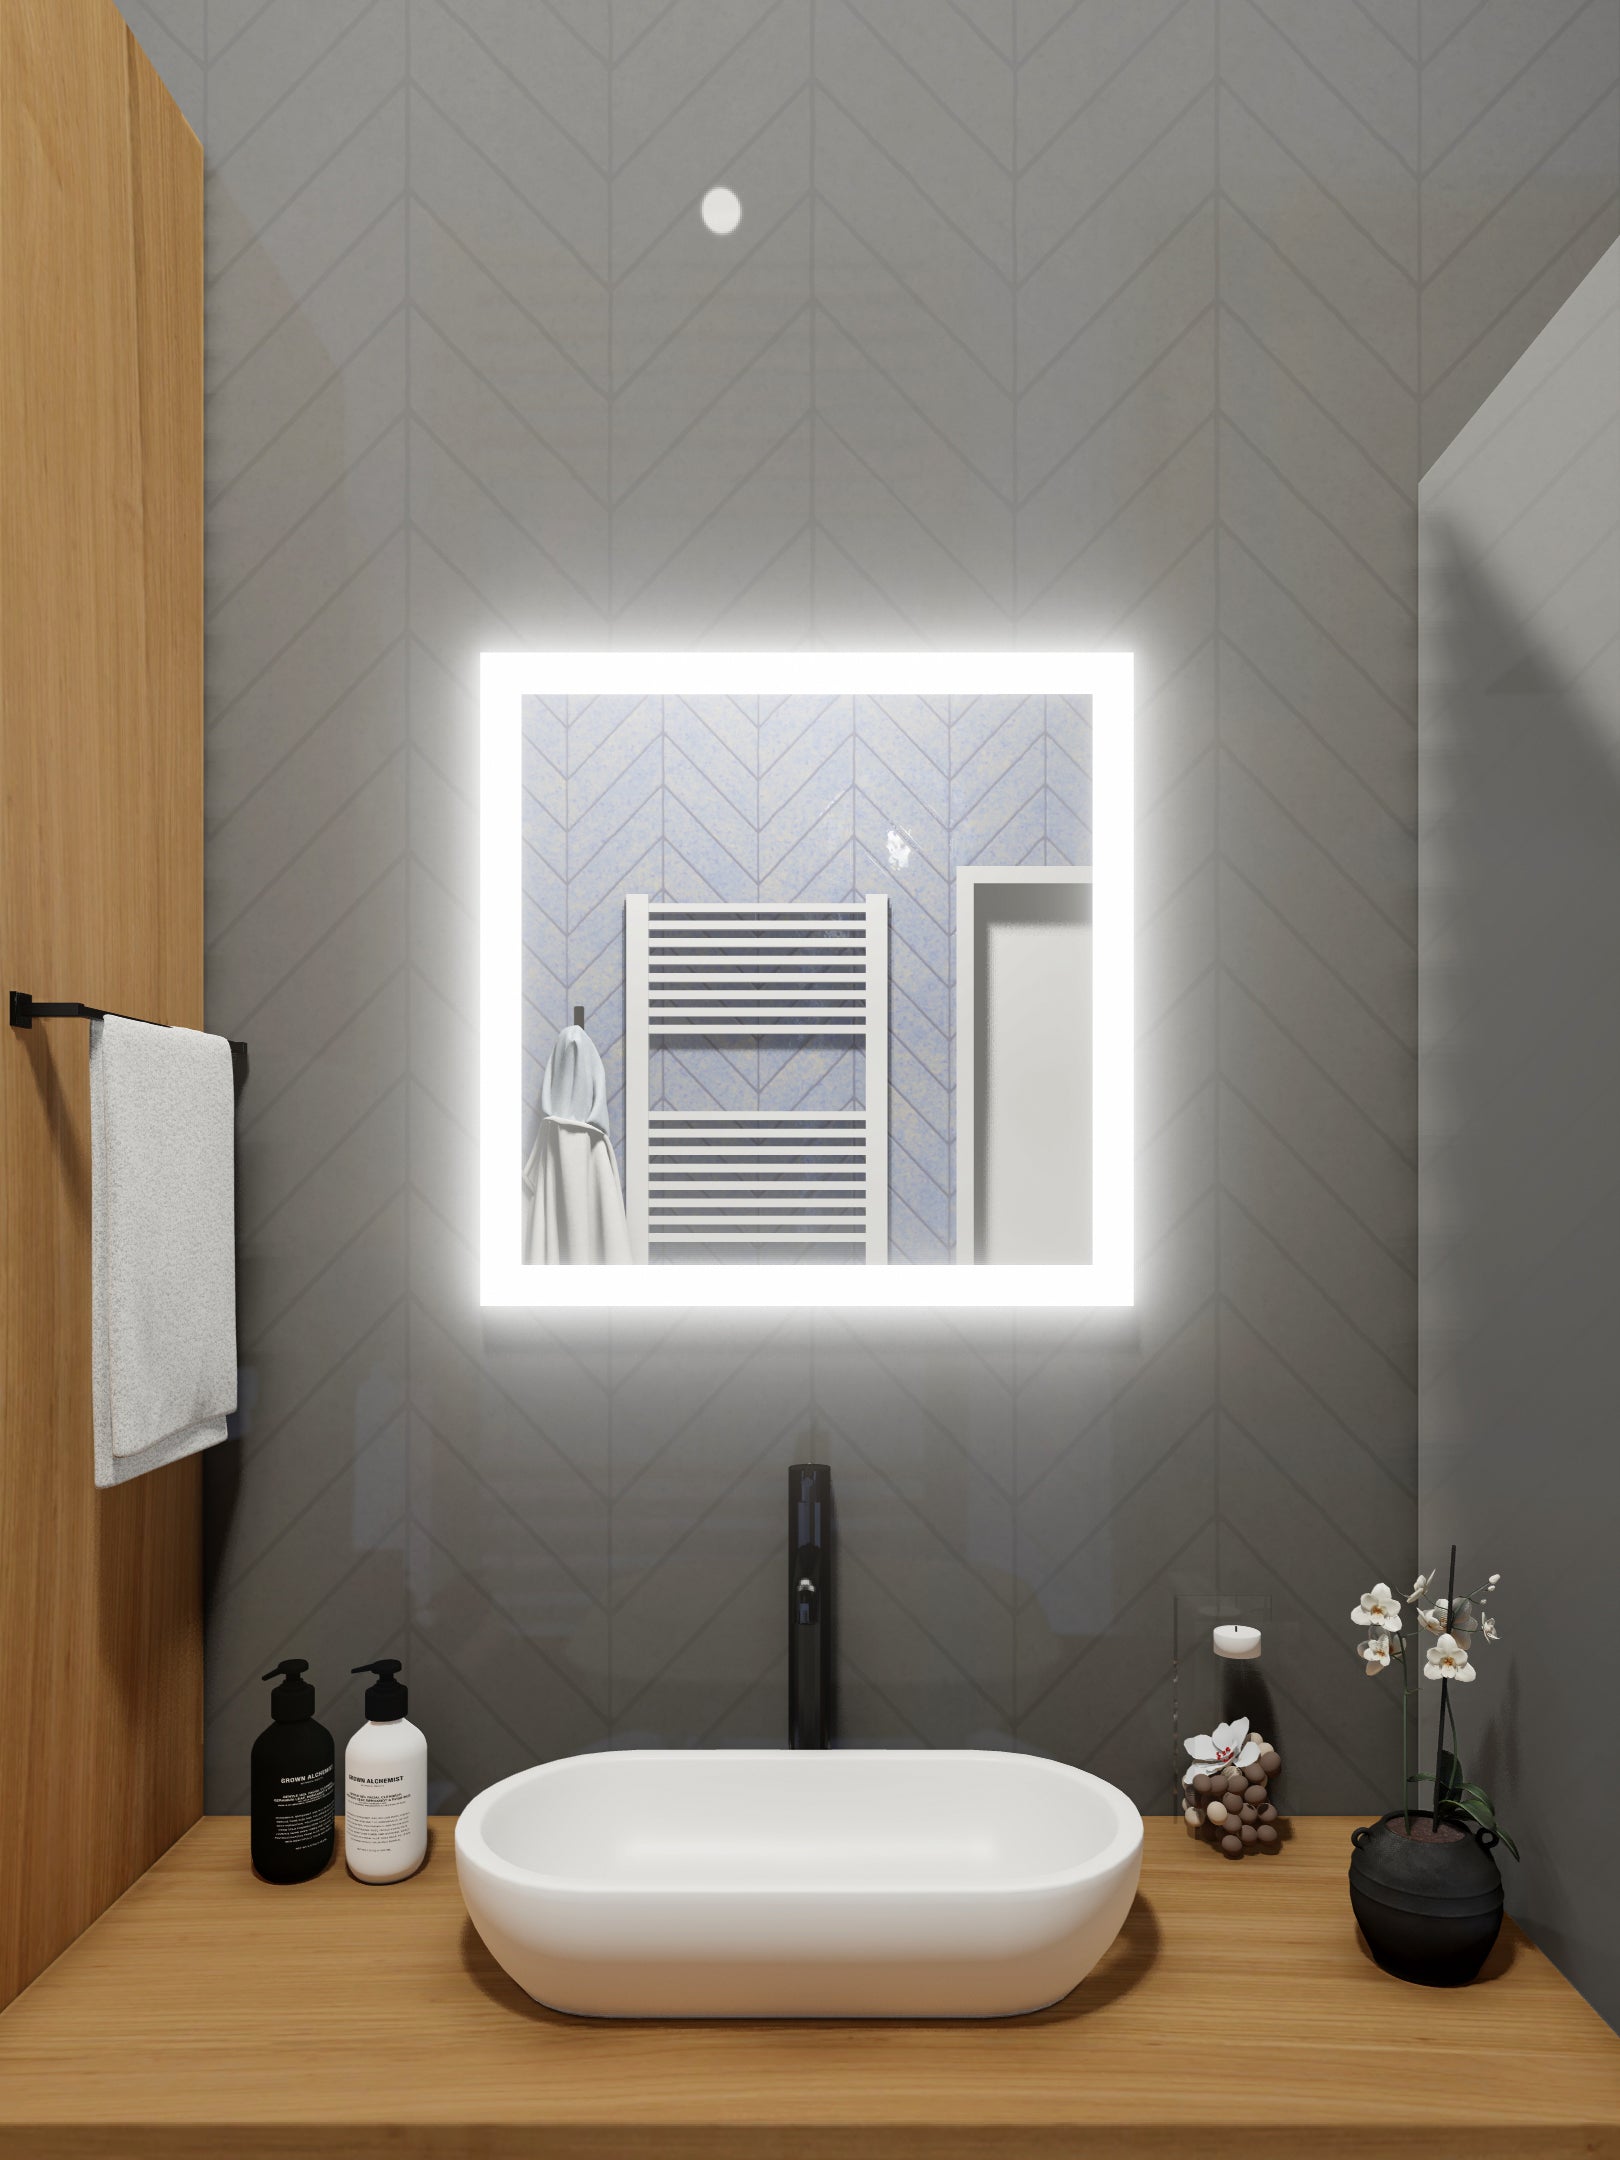 LED Mirror (Side-Lighted) 30" x 30"